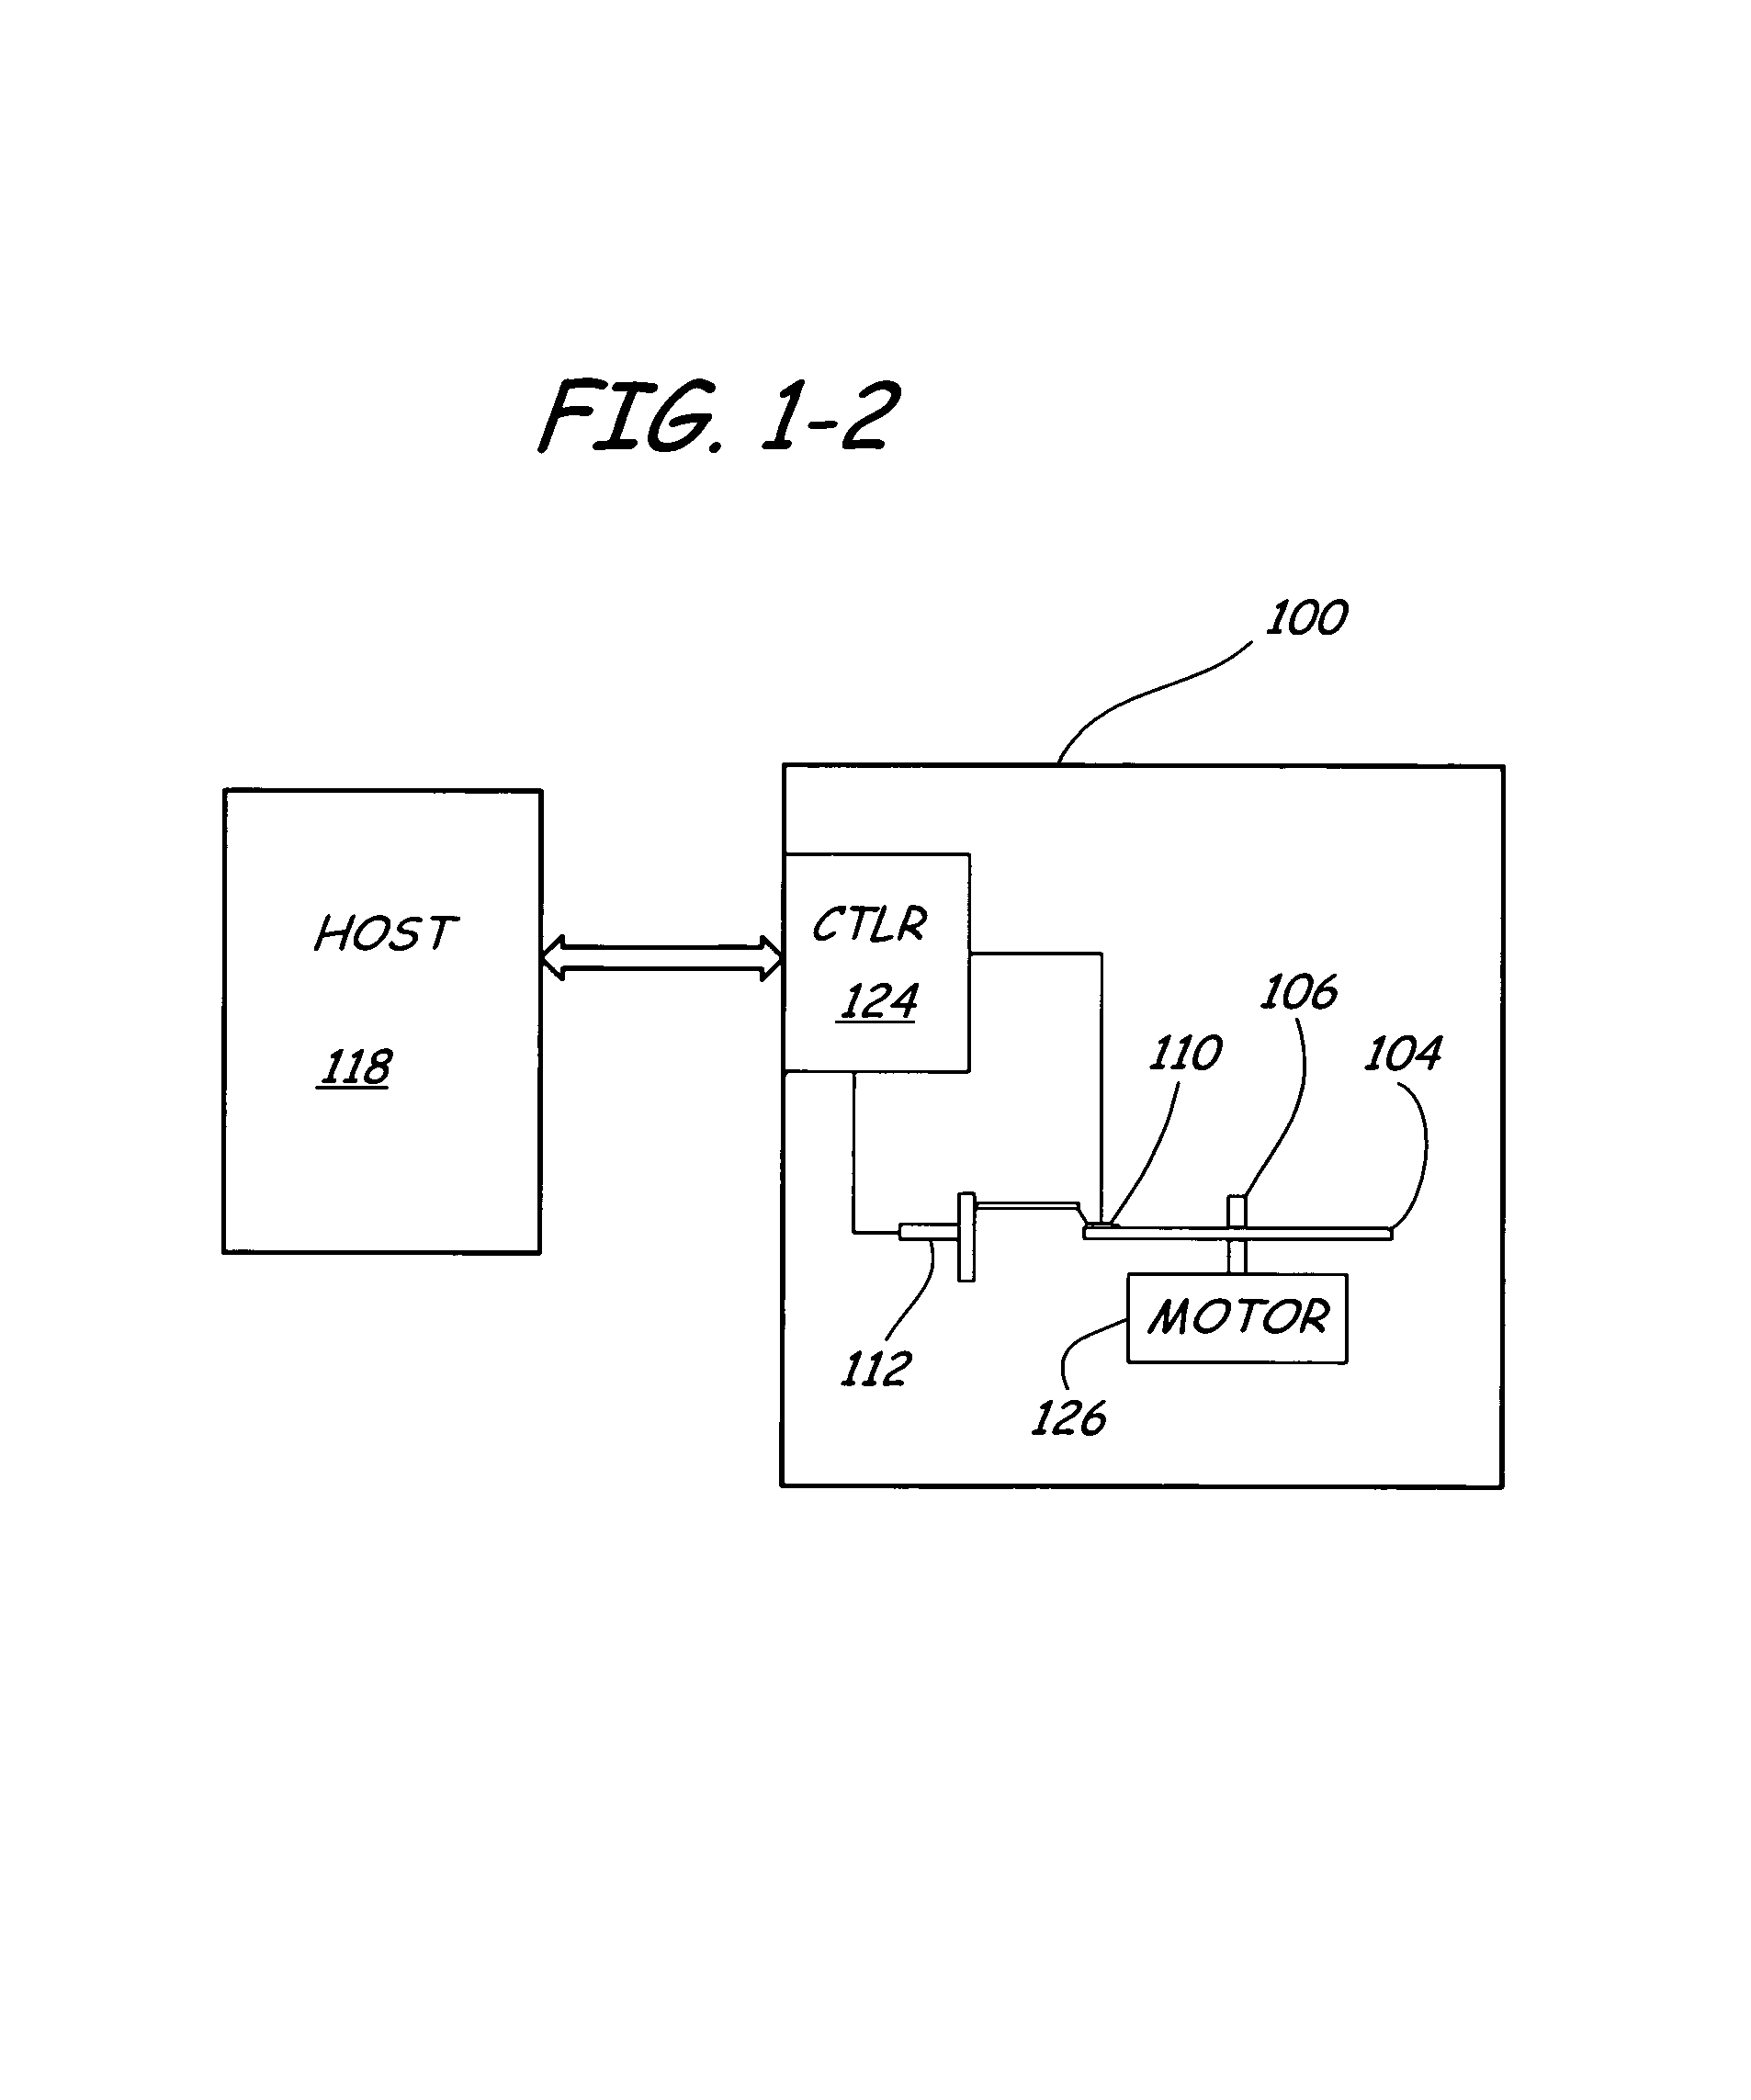 Differential/dual CPP recording head